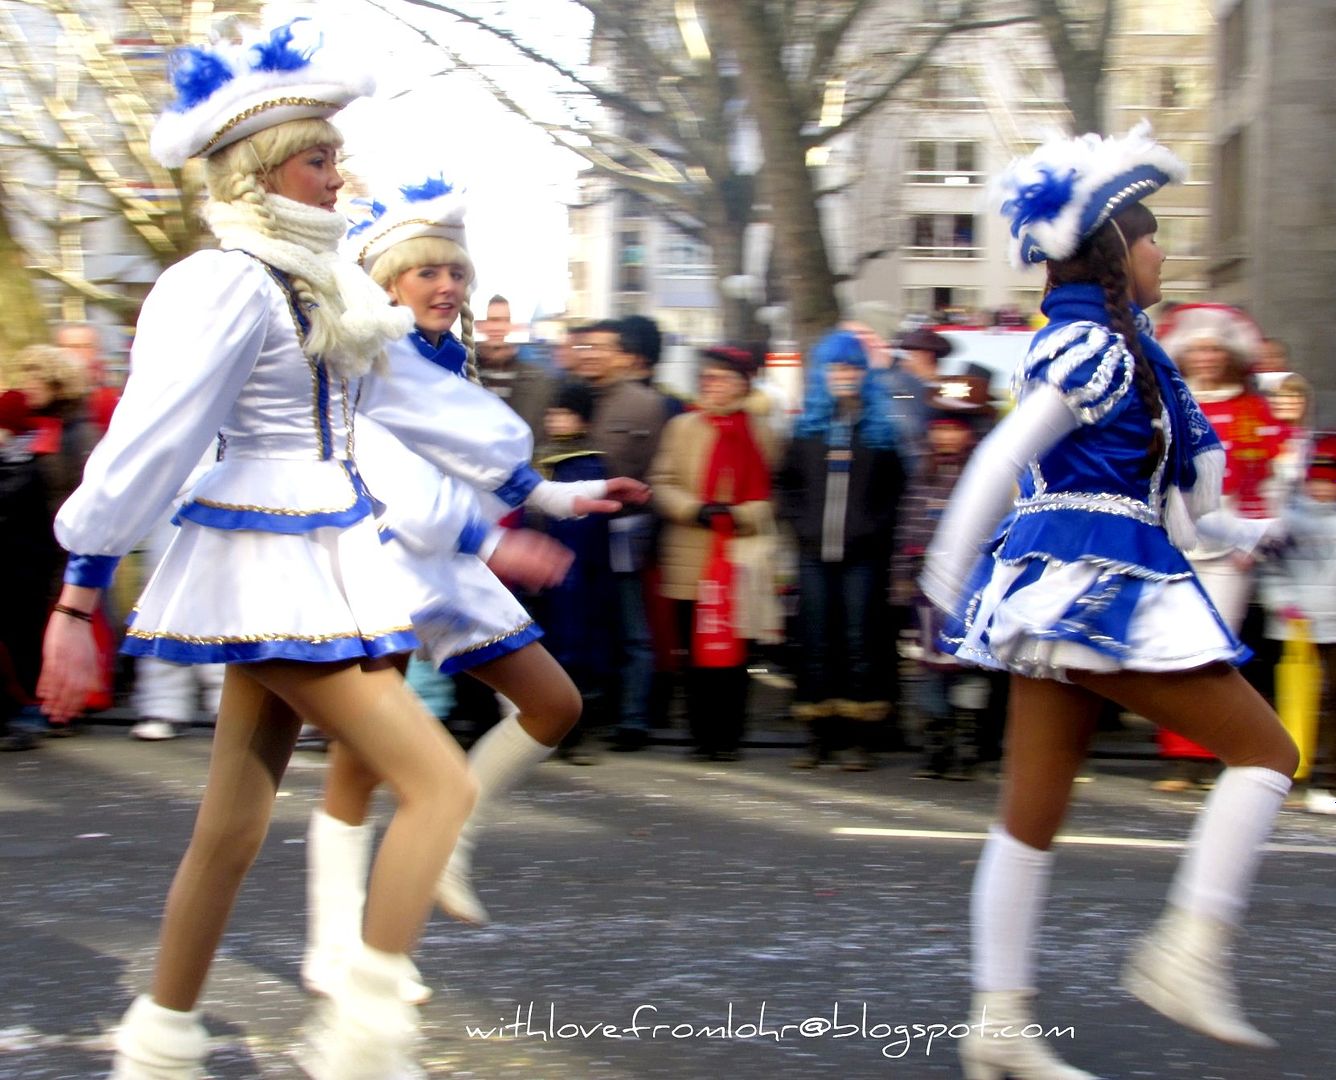 20.02.12, Today is Rosenmontag or Rose Monday in Germany. It is the highlight of the German carnival, a day of celebration which includes dressing up in costumes, parades and heavy drinking!!!